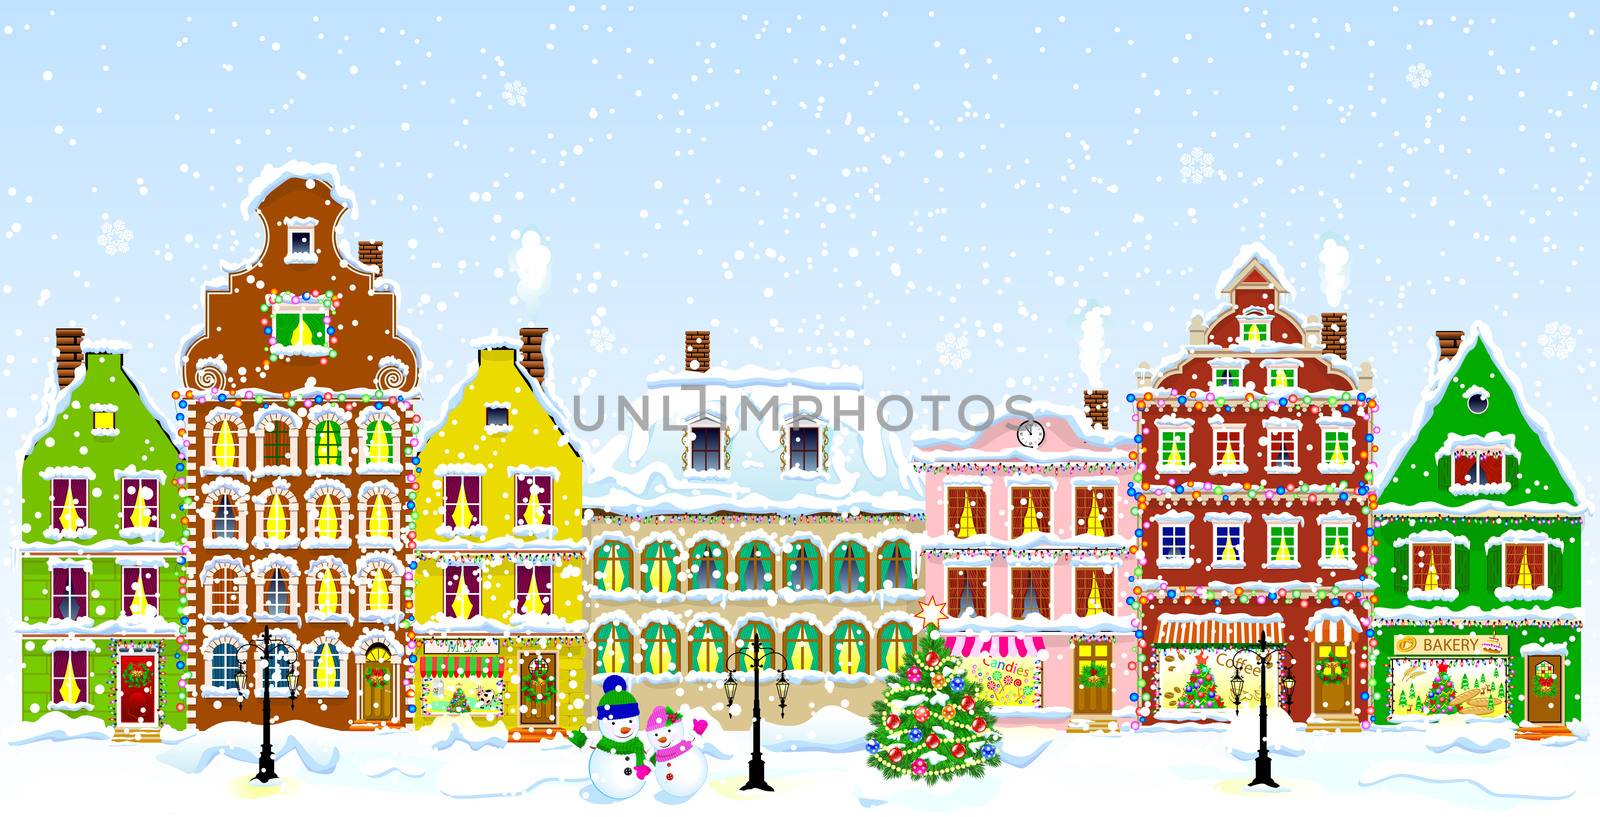 City street in winter. Christmas Eve. The winter vacation. The houses are covered with snow. Snow on a city street. Houses decorated before the winter holidays.                                                                                                        